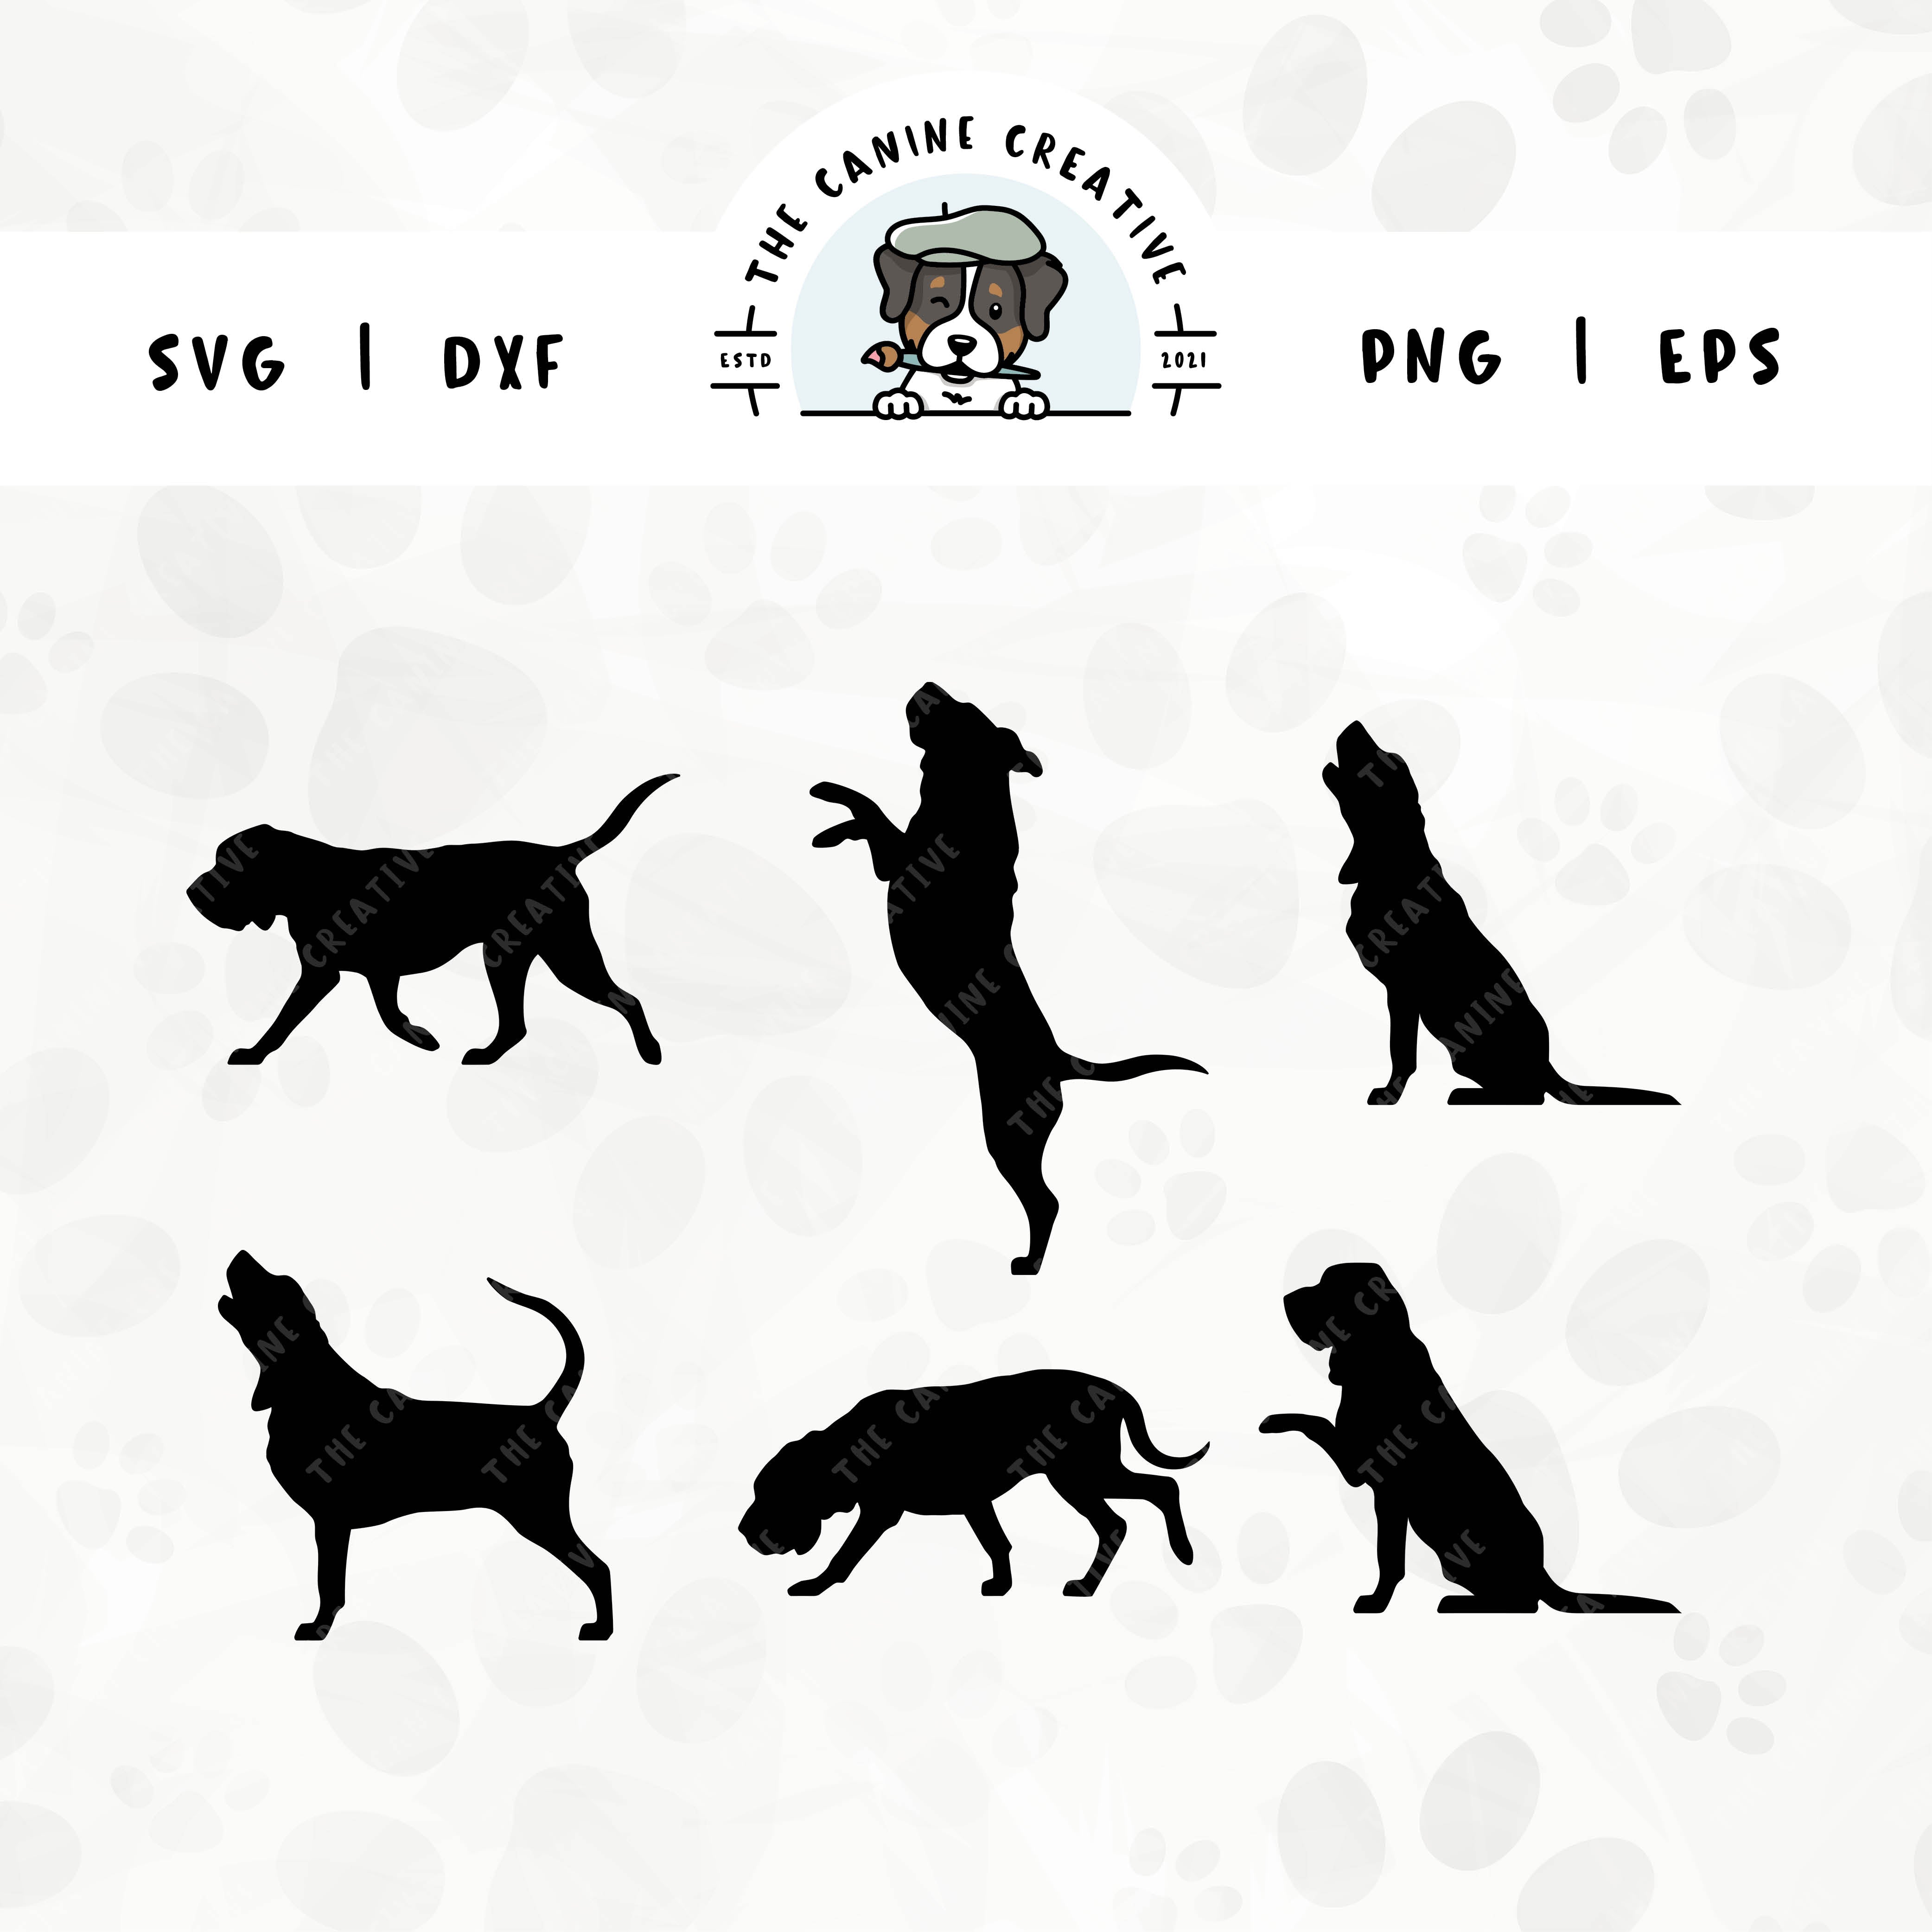 This 6-pack Bloodhound silhouette bundle (set 2) features various dog poses including walking, jumping up, howling, baying, sniffing, and shaking a paw. File formats include: SVG, DXF, PNG, and EPS.